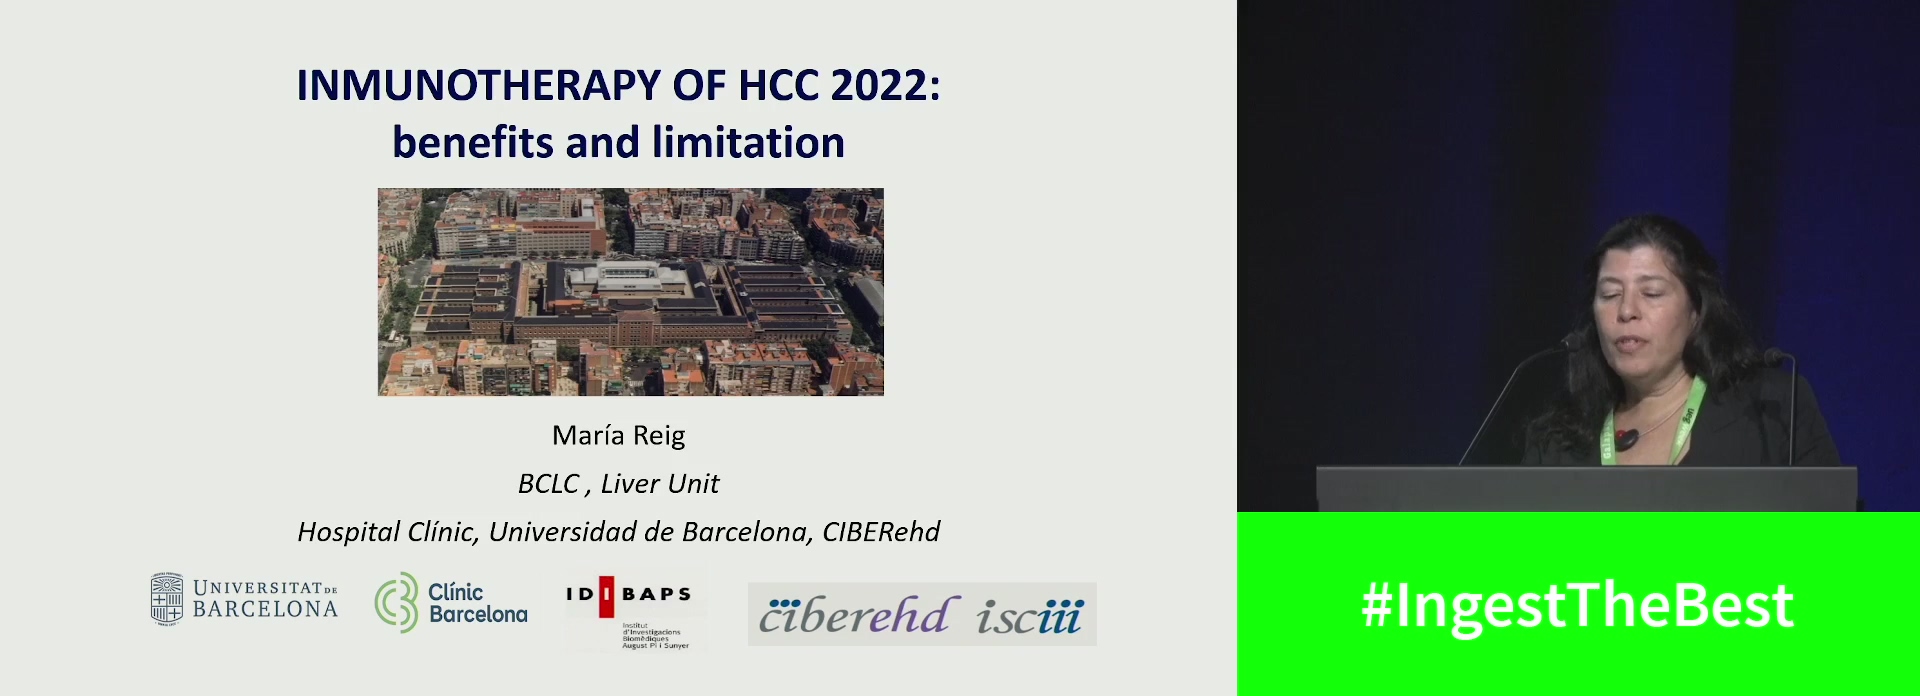 Immunotherapy of HCC 2022: Benefits and limitations